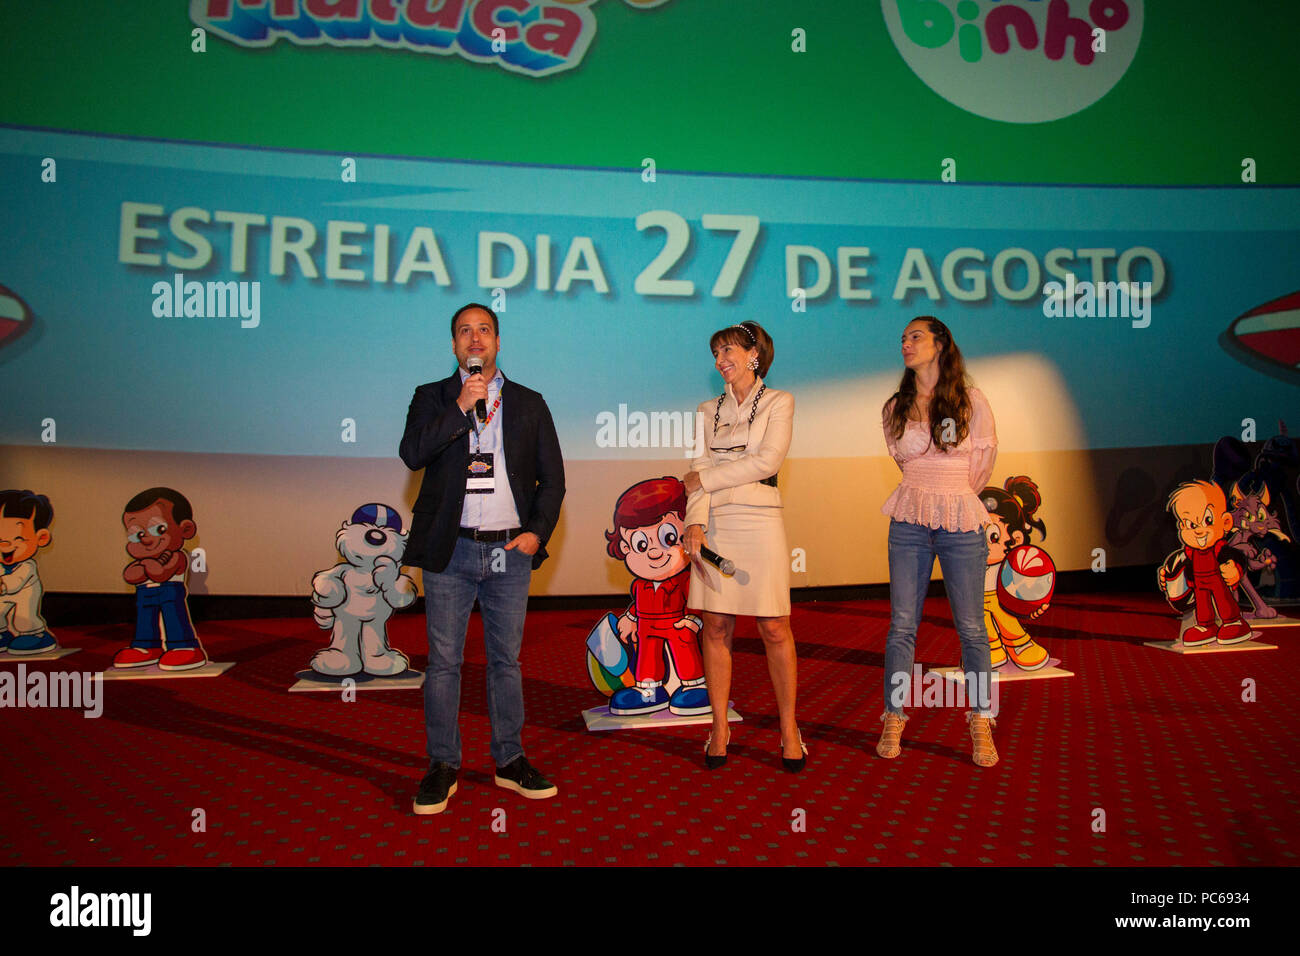 SÃO PAULO, SP - 31.07.2018: ANIMAÇÃO DO SENNINHA É LANÇADA EM SP - This event was held on Tuesday (31) the launch event of the new animated series of the character Senninha that will premiere on 08/08 on Gloobat&#39;s Glat cat channel. The animation that is inspired by three-time For 1 champion Ayrton Senna is called &quotquot;Senninha na Pista Maluca&quot; (&amotquot;Senninha na Pista Maluca&quot;), h has 26 episodes, each withwith 11 minutes, which will be shown daily arious times. No highlight is the executive dve director of Globosat Paulo Daudt Marinho alongside Viviane Senna, president o Stock Photo